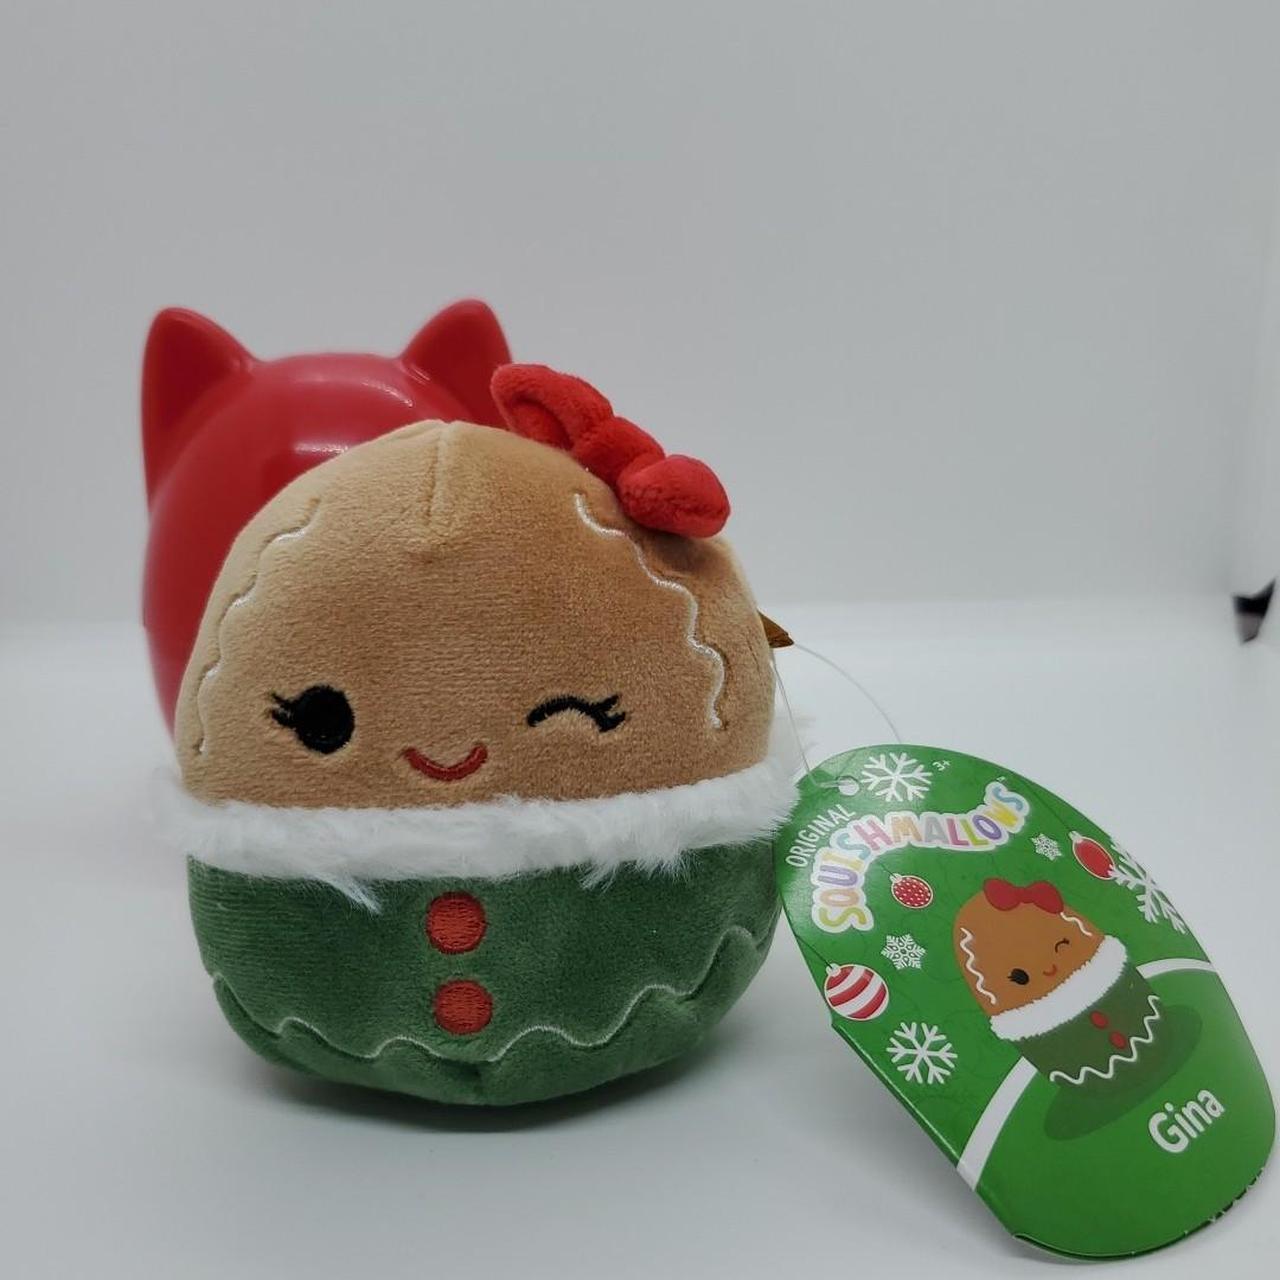 Squishmallows Gina the Gingerbread Mystery Squad - Depop